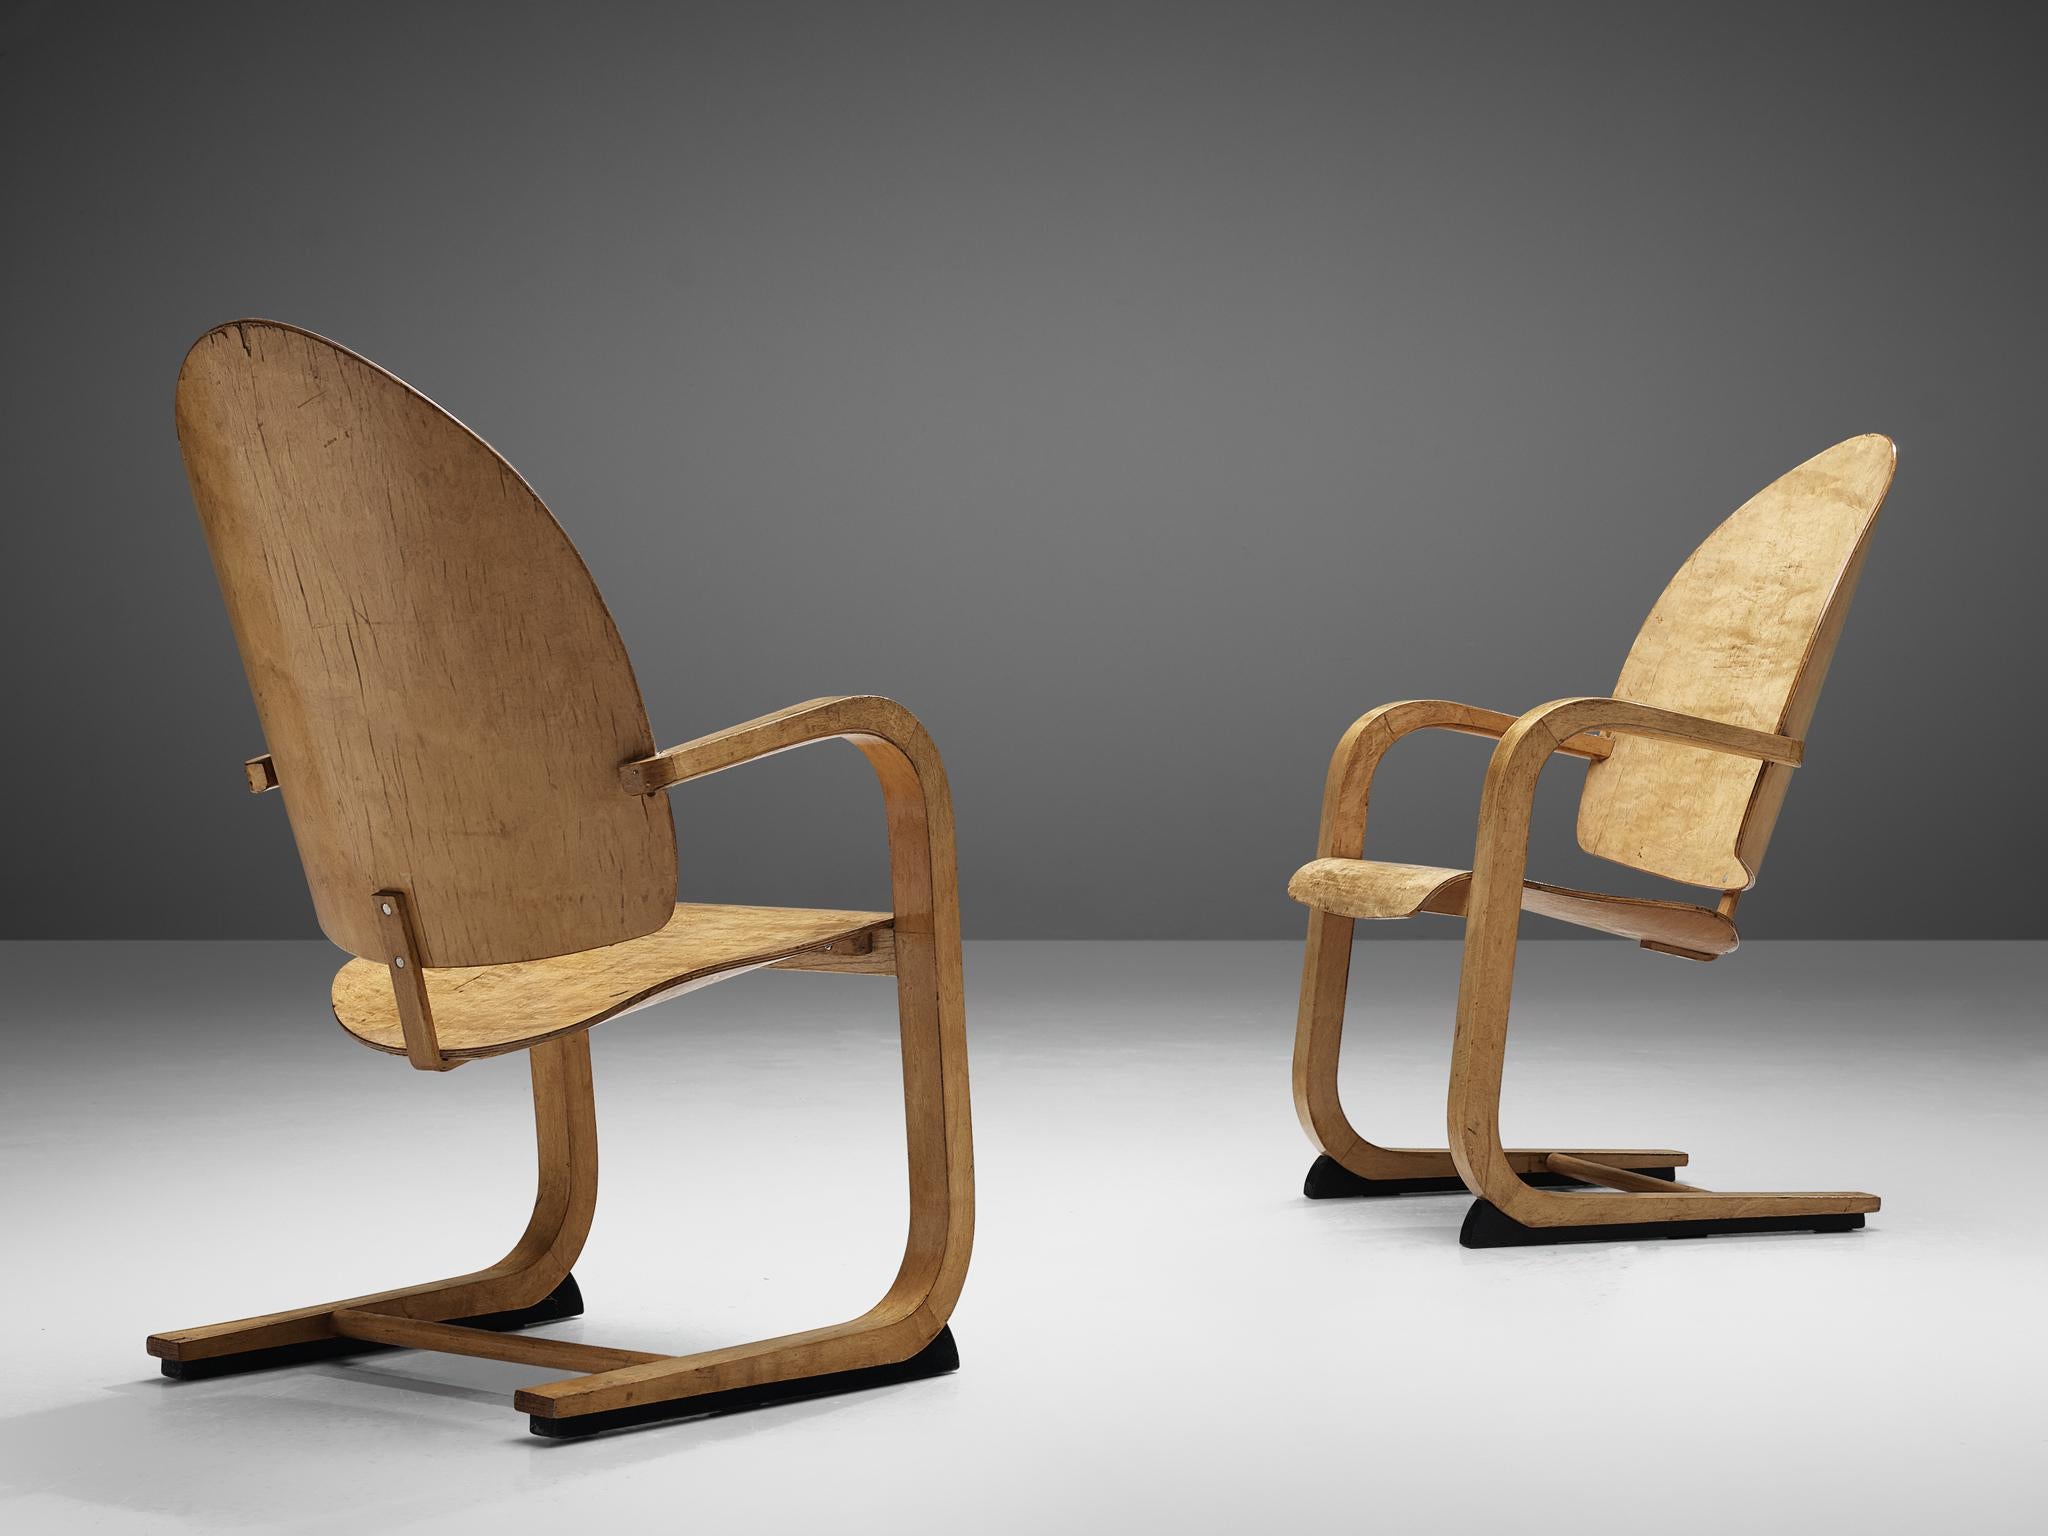 Pair of cantilever armchairs, plywood, birch, black lacquered wood, Europe, 1930s

Pair of Modernist cantilever chairs in birch veneer bentwood that is reminisent of the innovative early 1930s designs of Marcel Breuer and Finnish designer Alvar